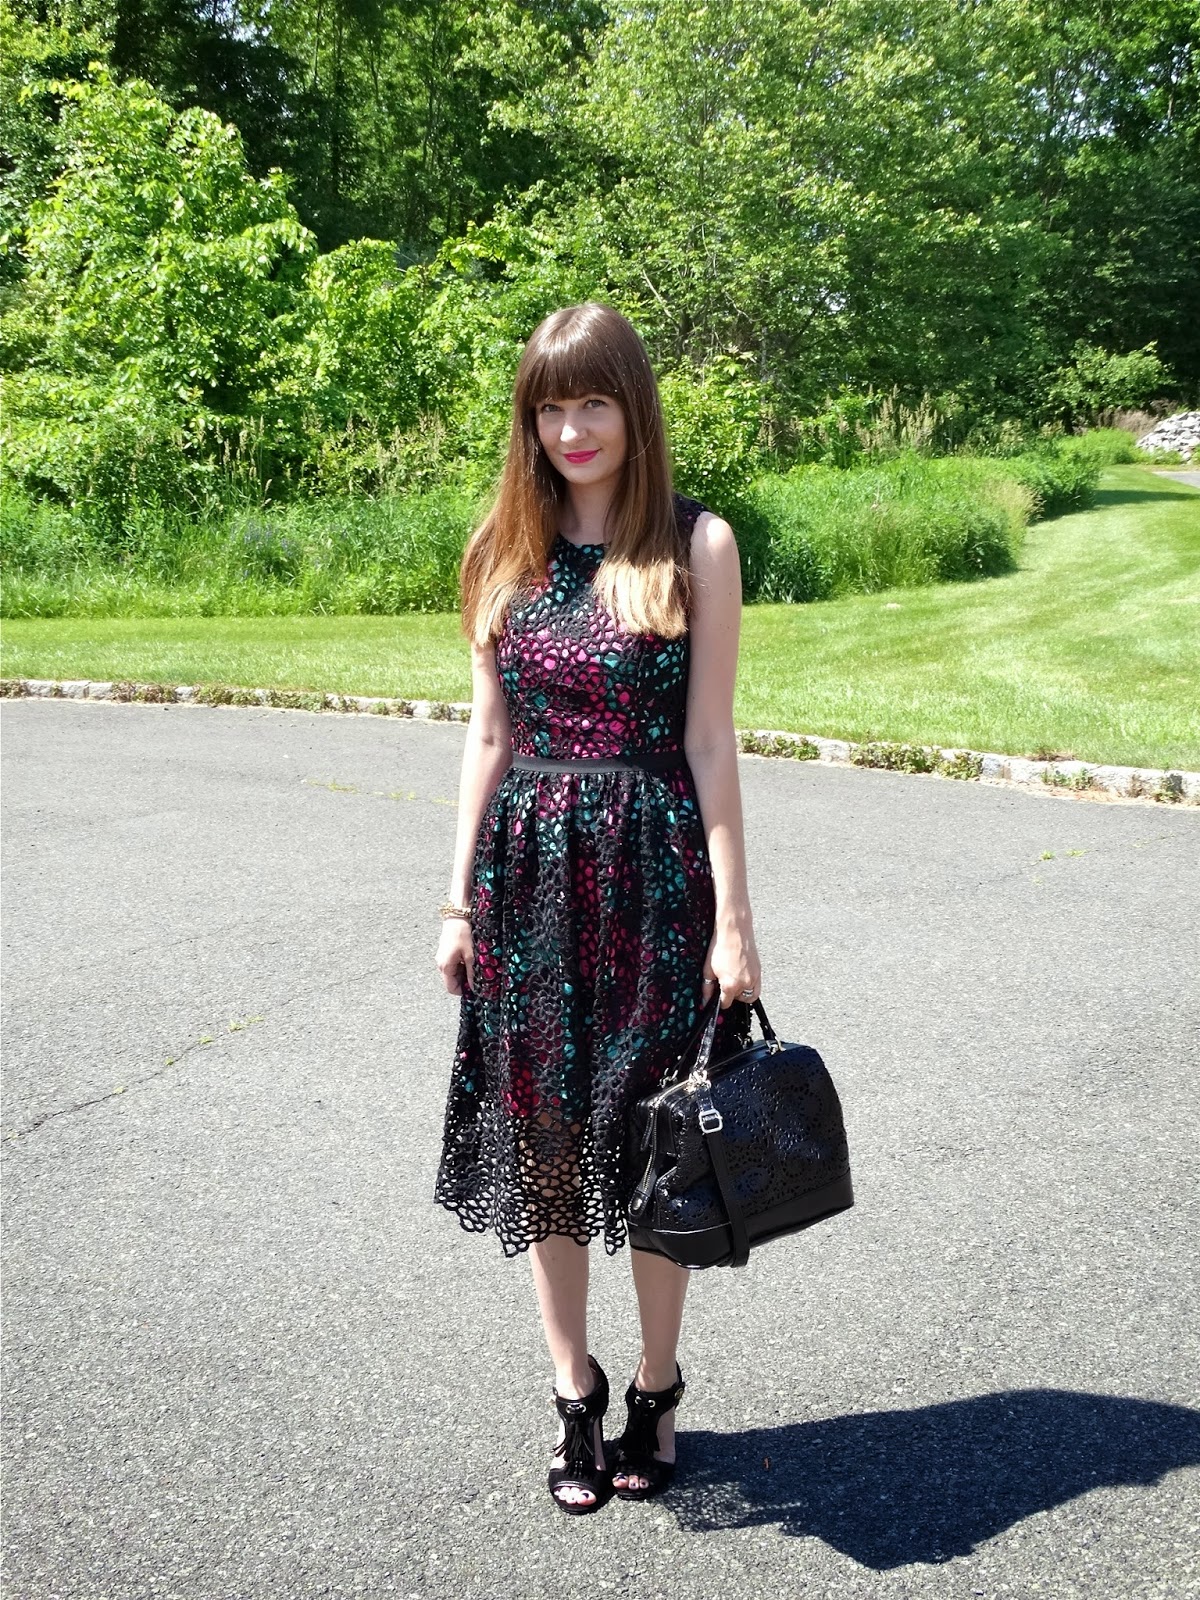 Anthropologie Dress, Coach Shoes, Sole Society Bag, as worn by House Of Jeffers | www.houseofjeffers.com